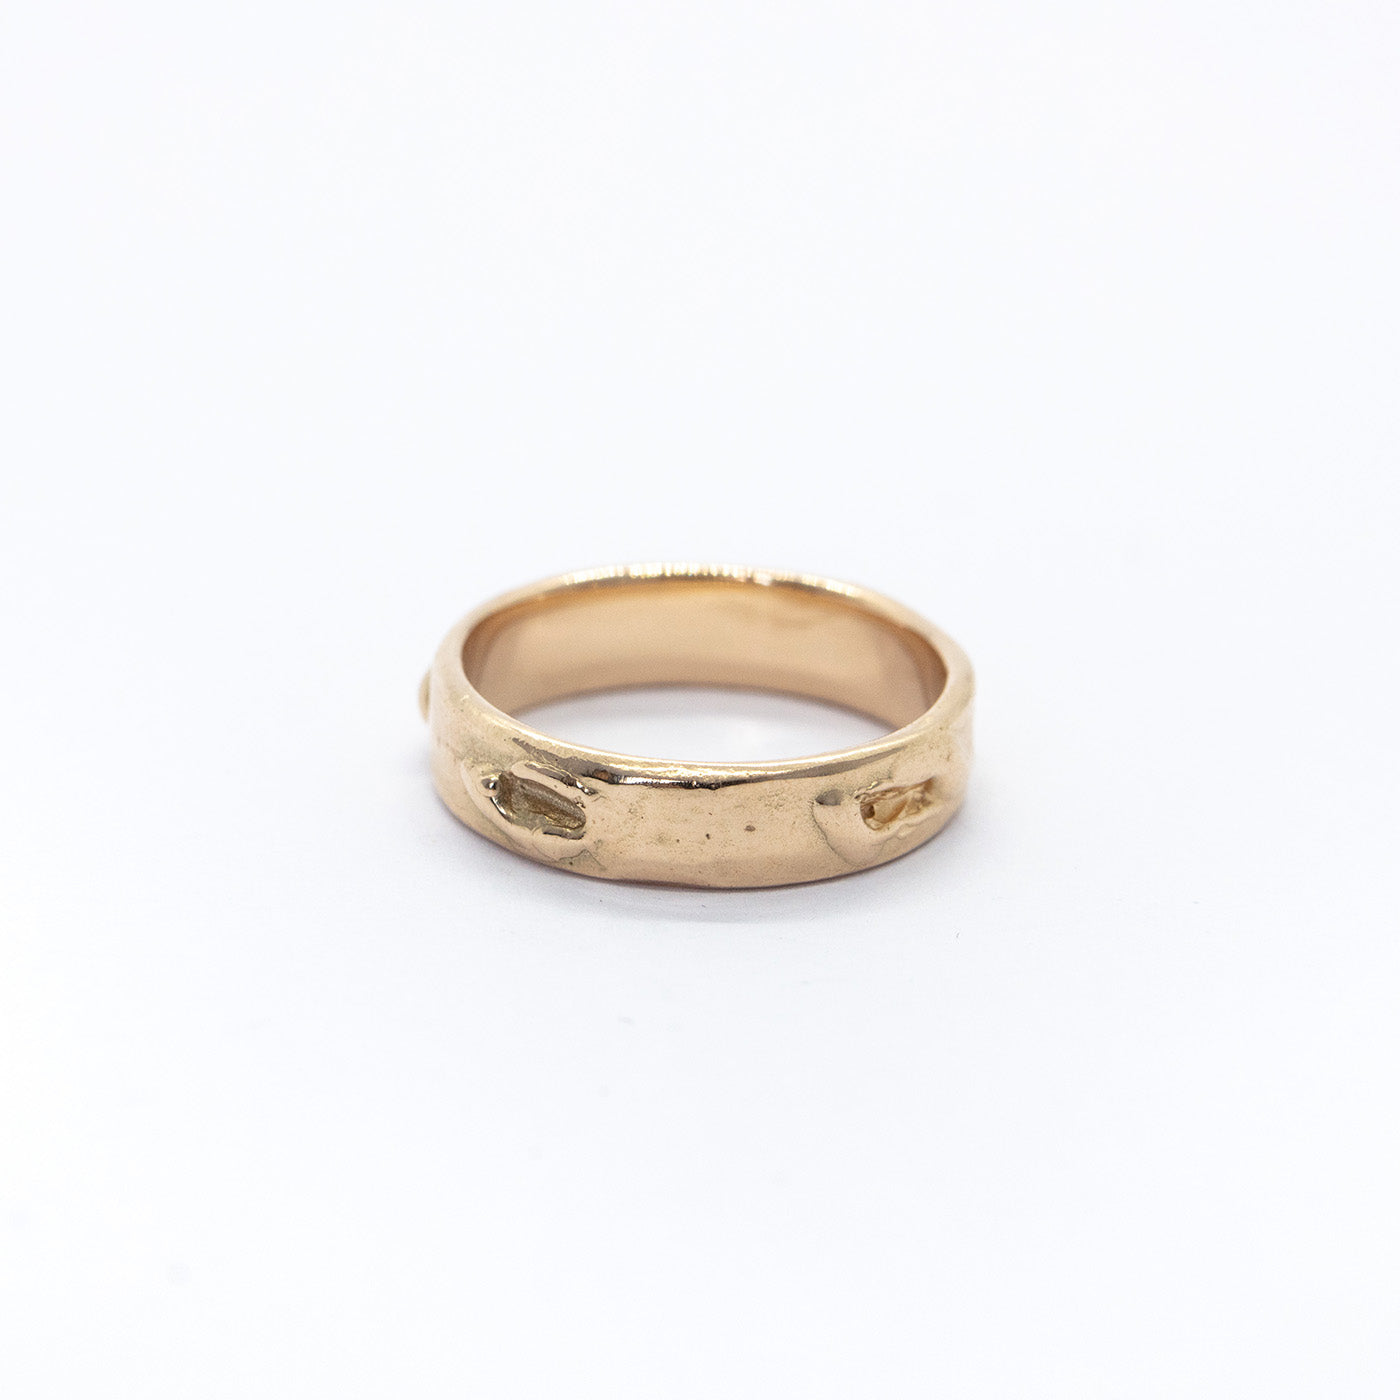     ring asteriae wedding band for her rose gold innan jewellery berlin